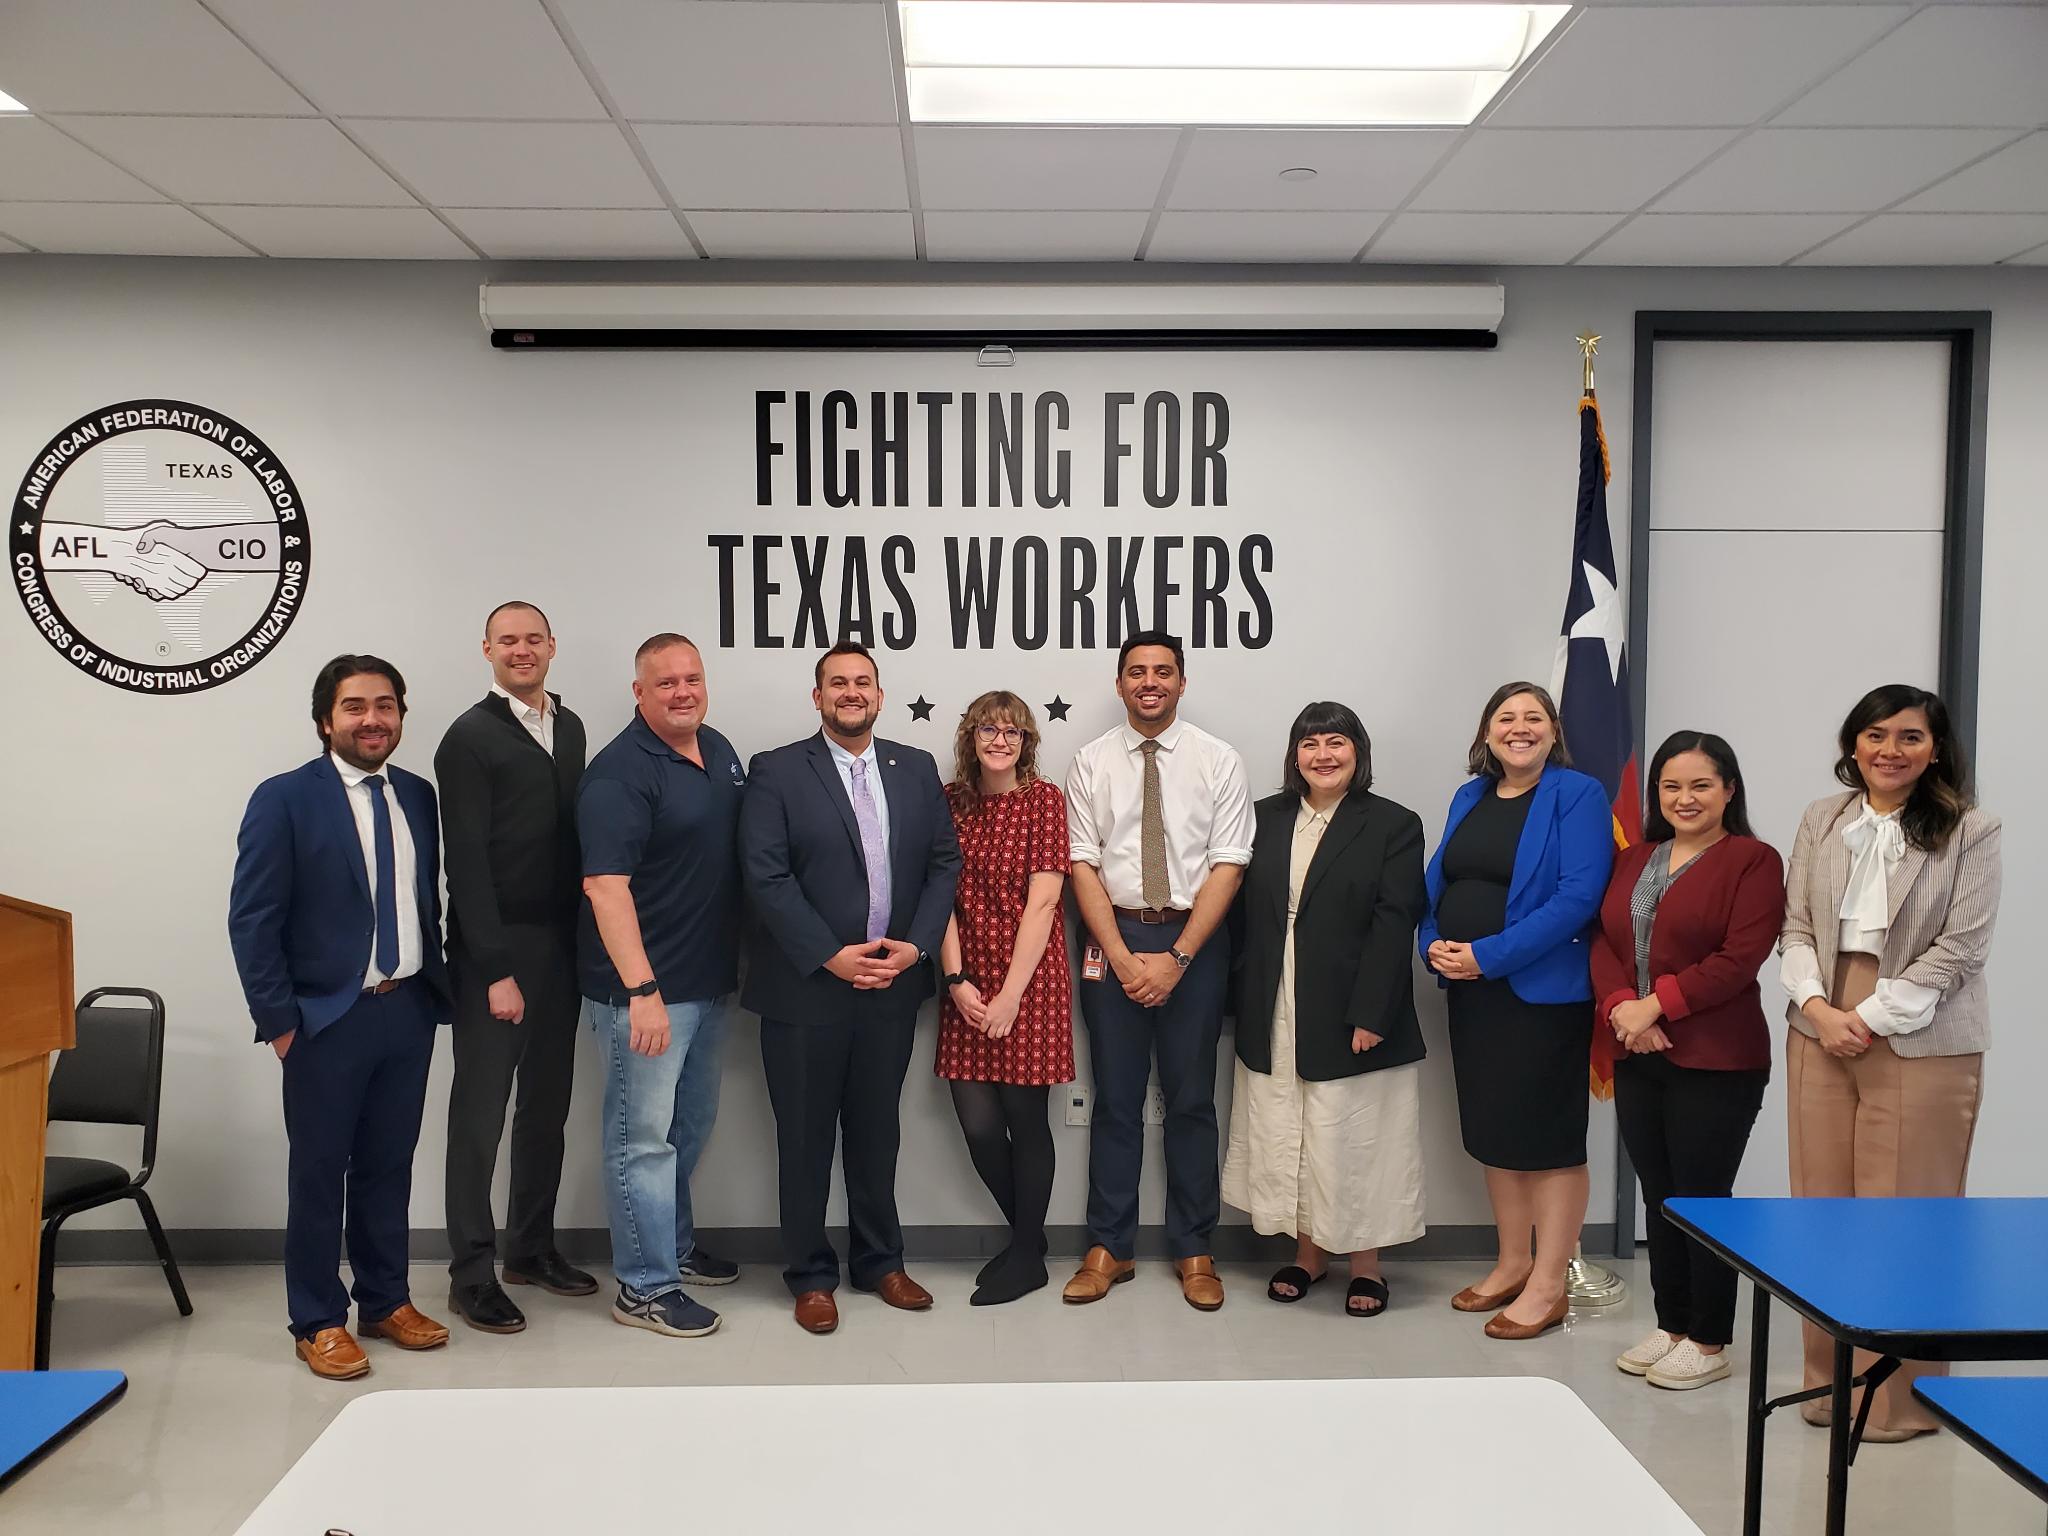 LPTX members, staff, and partners posing in front of a sign that says "Fighting for Texas Workers."